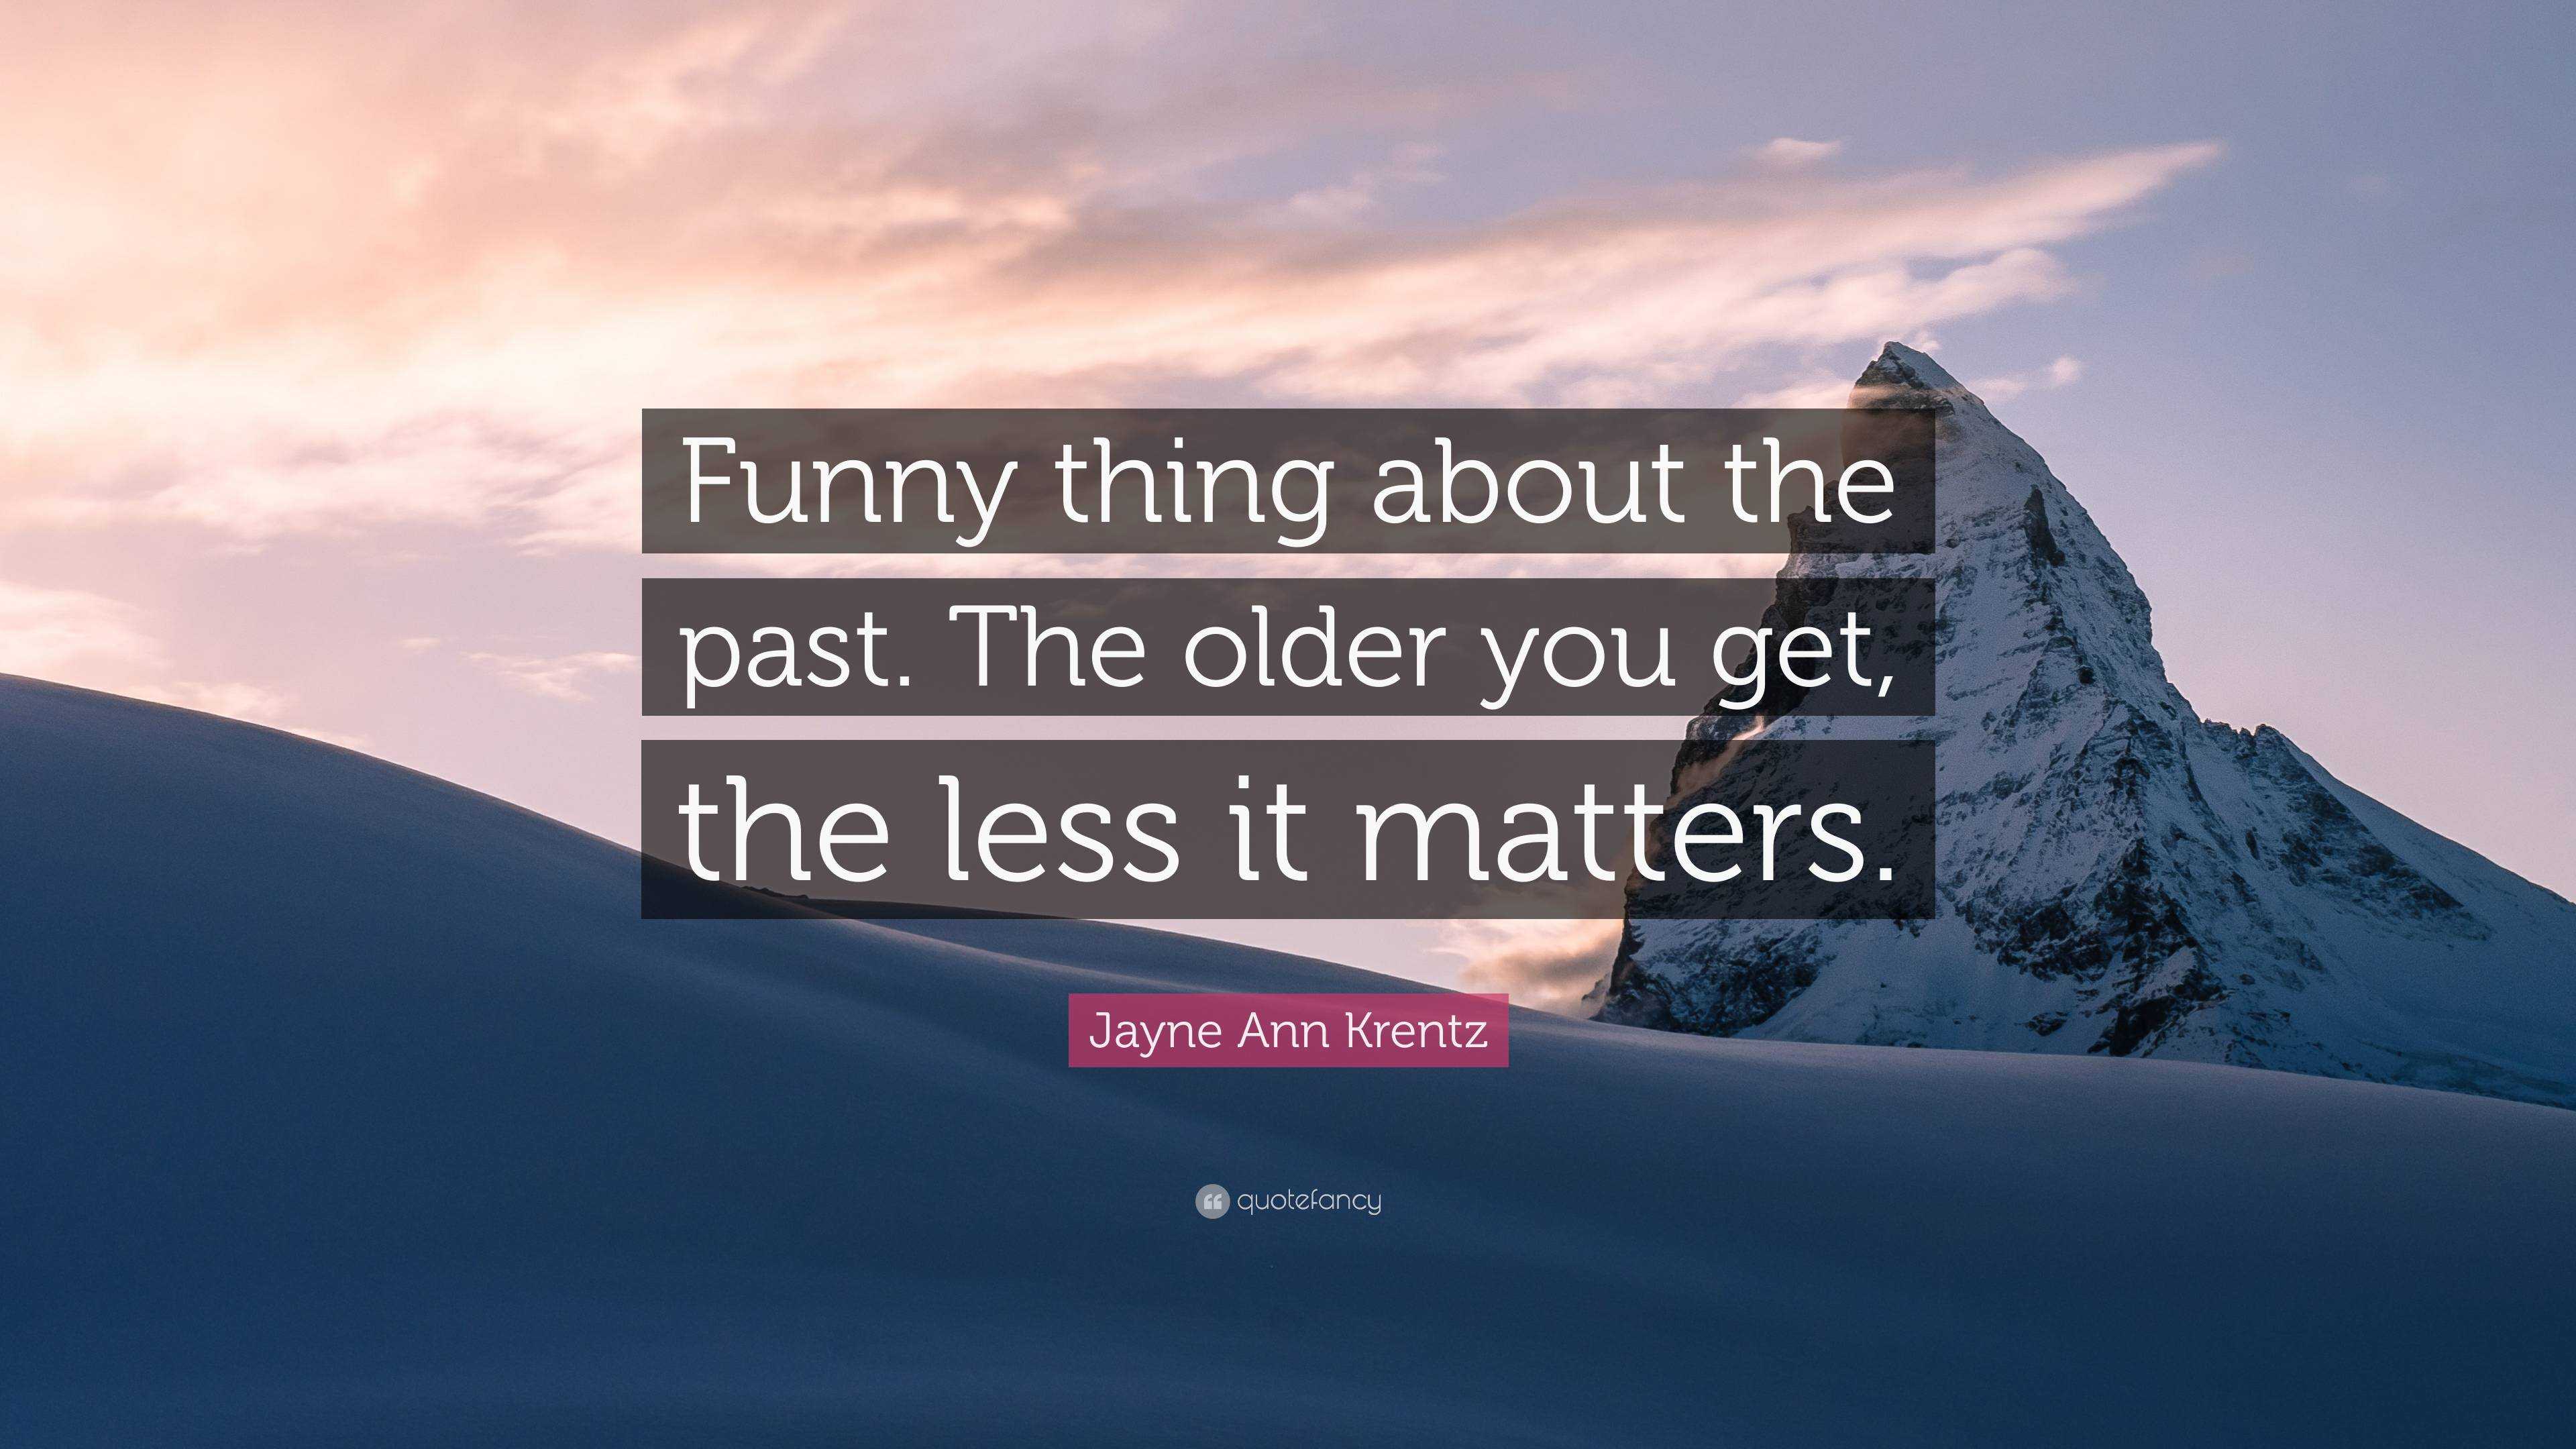 Jayne Ann Krentz Quote: “Funny thing about the past. The older you get, the  less it